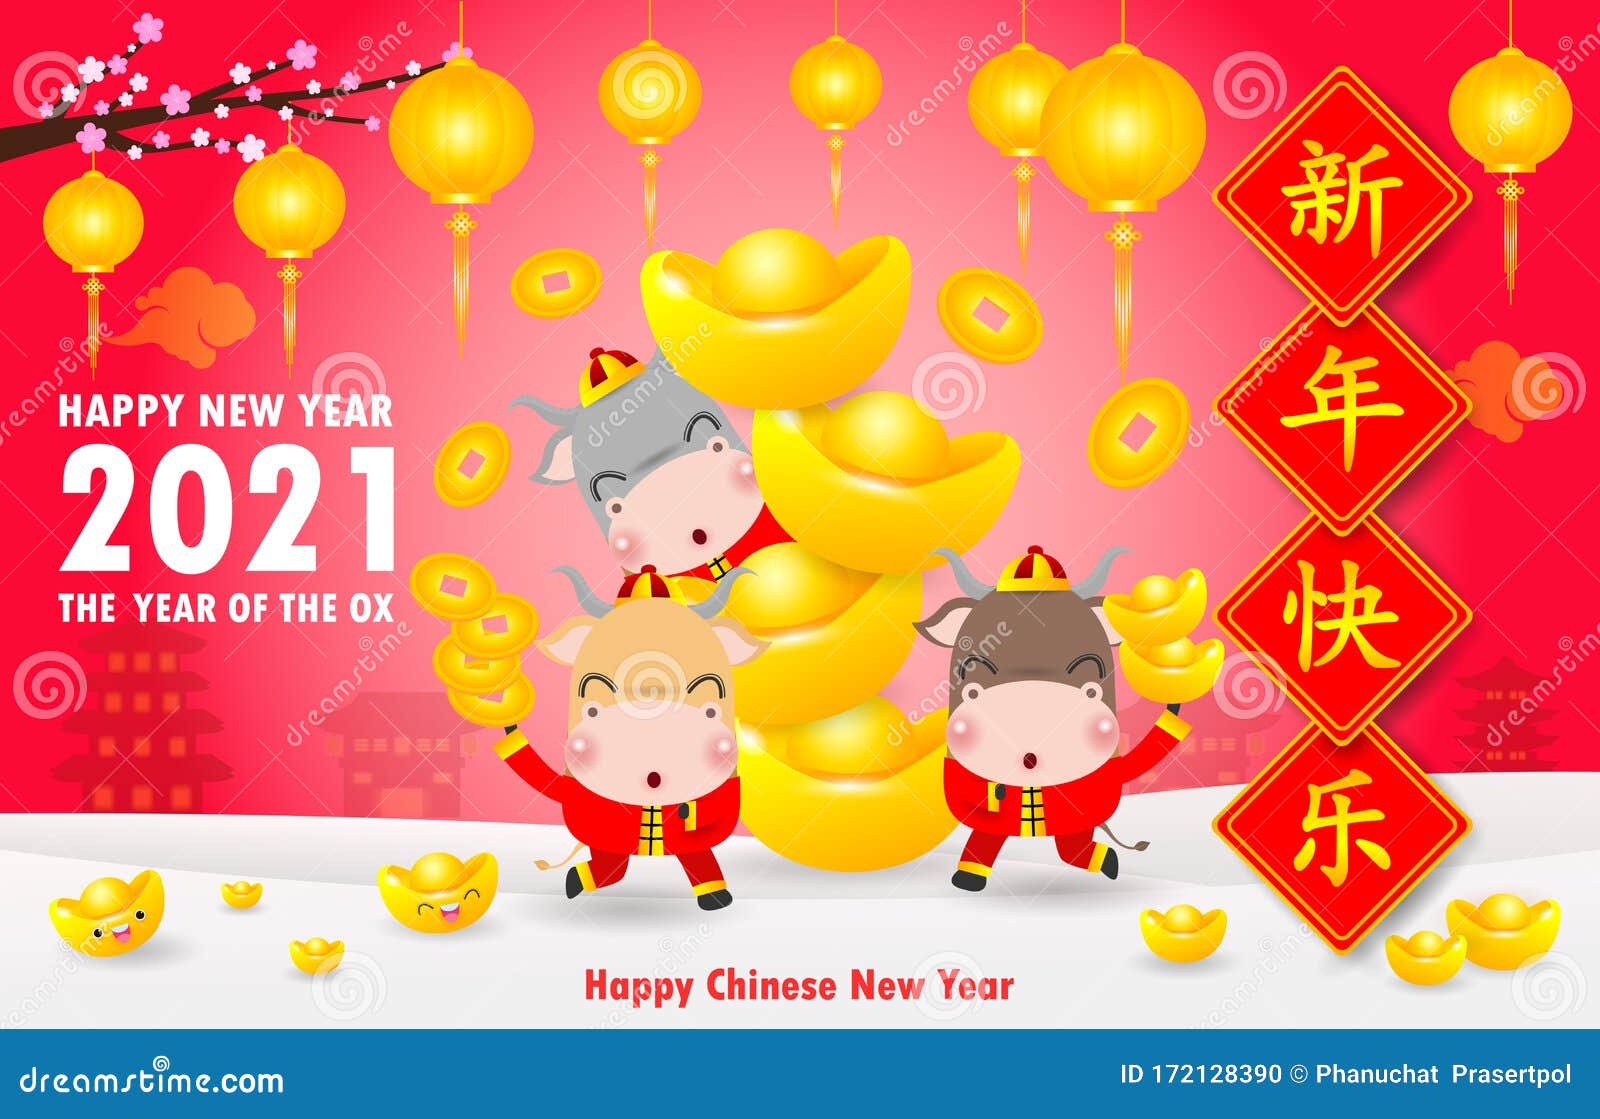 Happy Chinese New Year 2021 Wishes